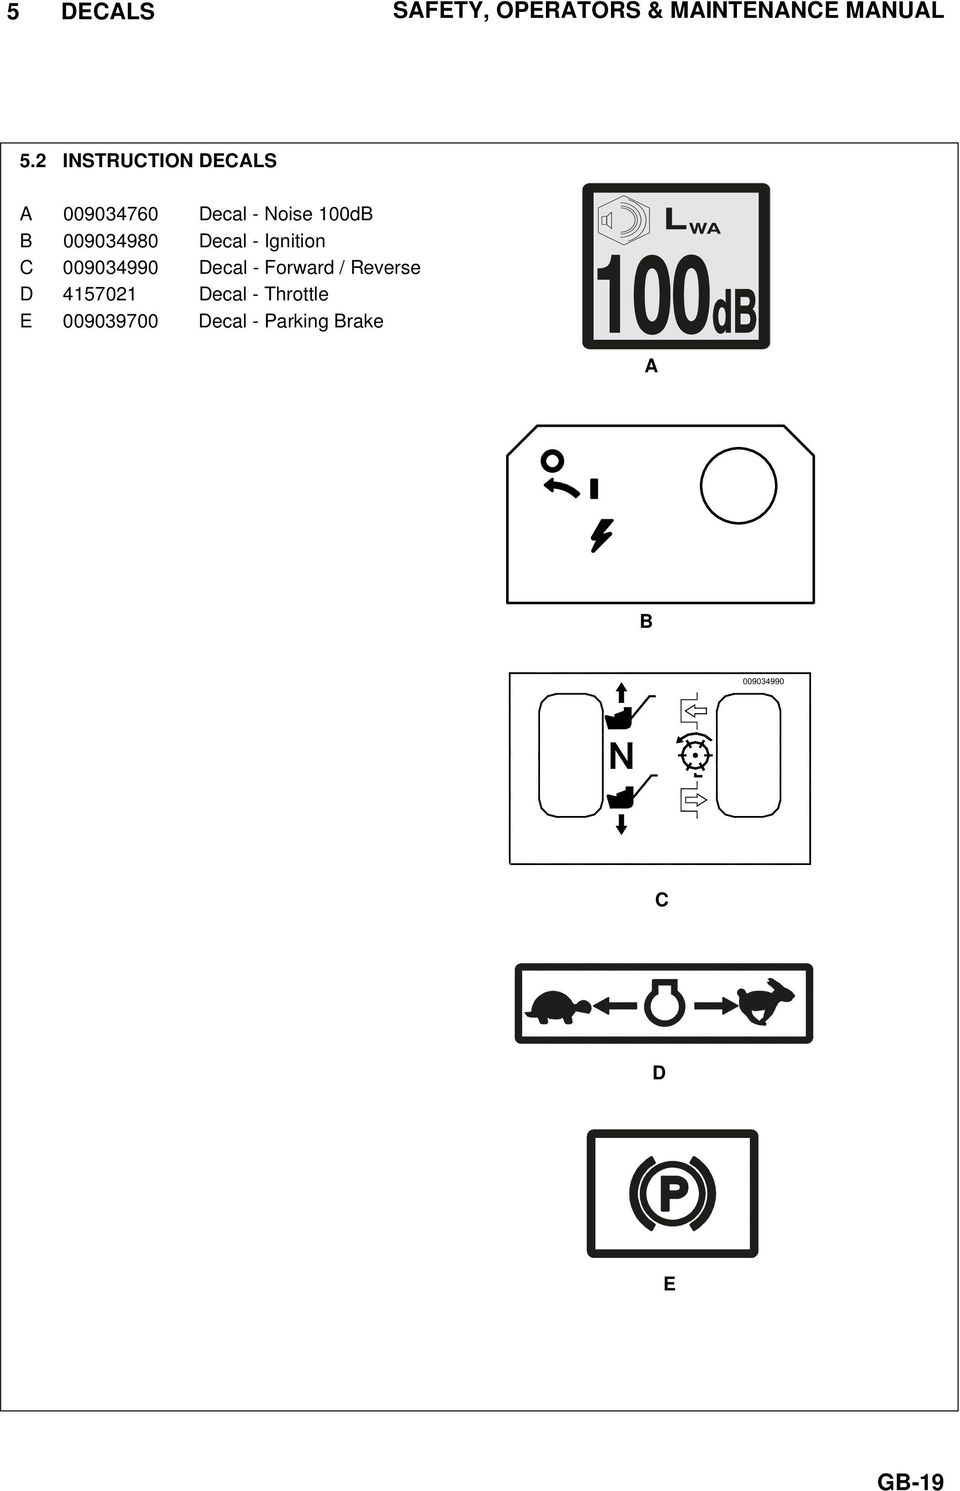 009034980 Decal - Ignition C 009034990 Decal - Forward /